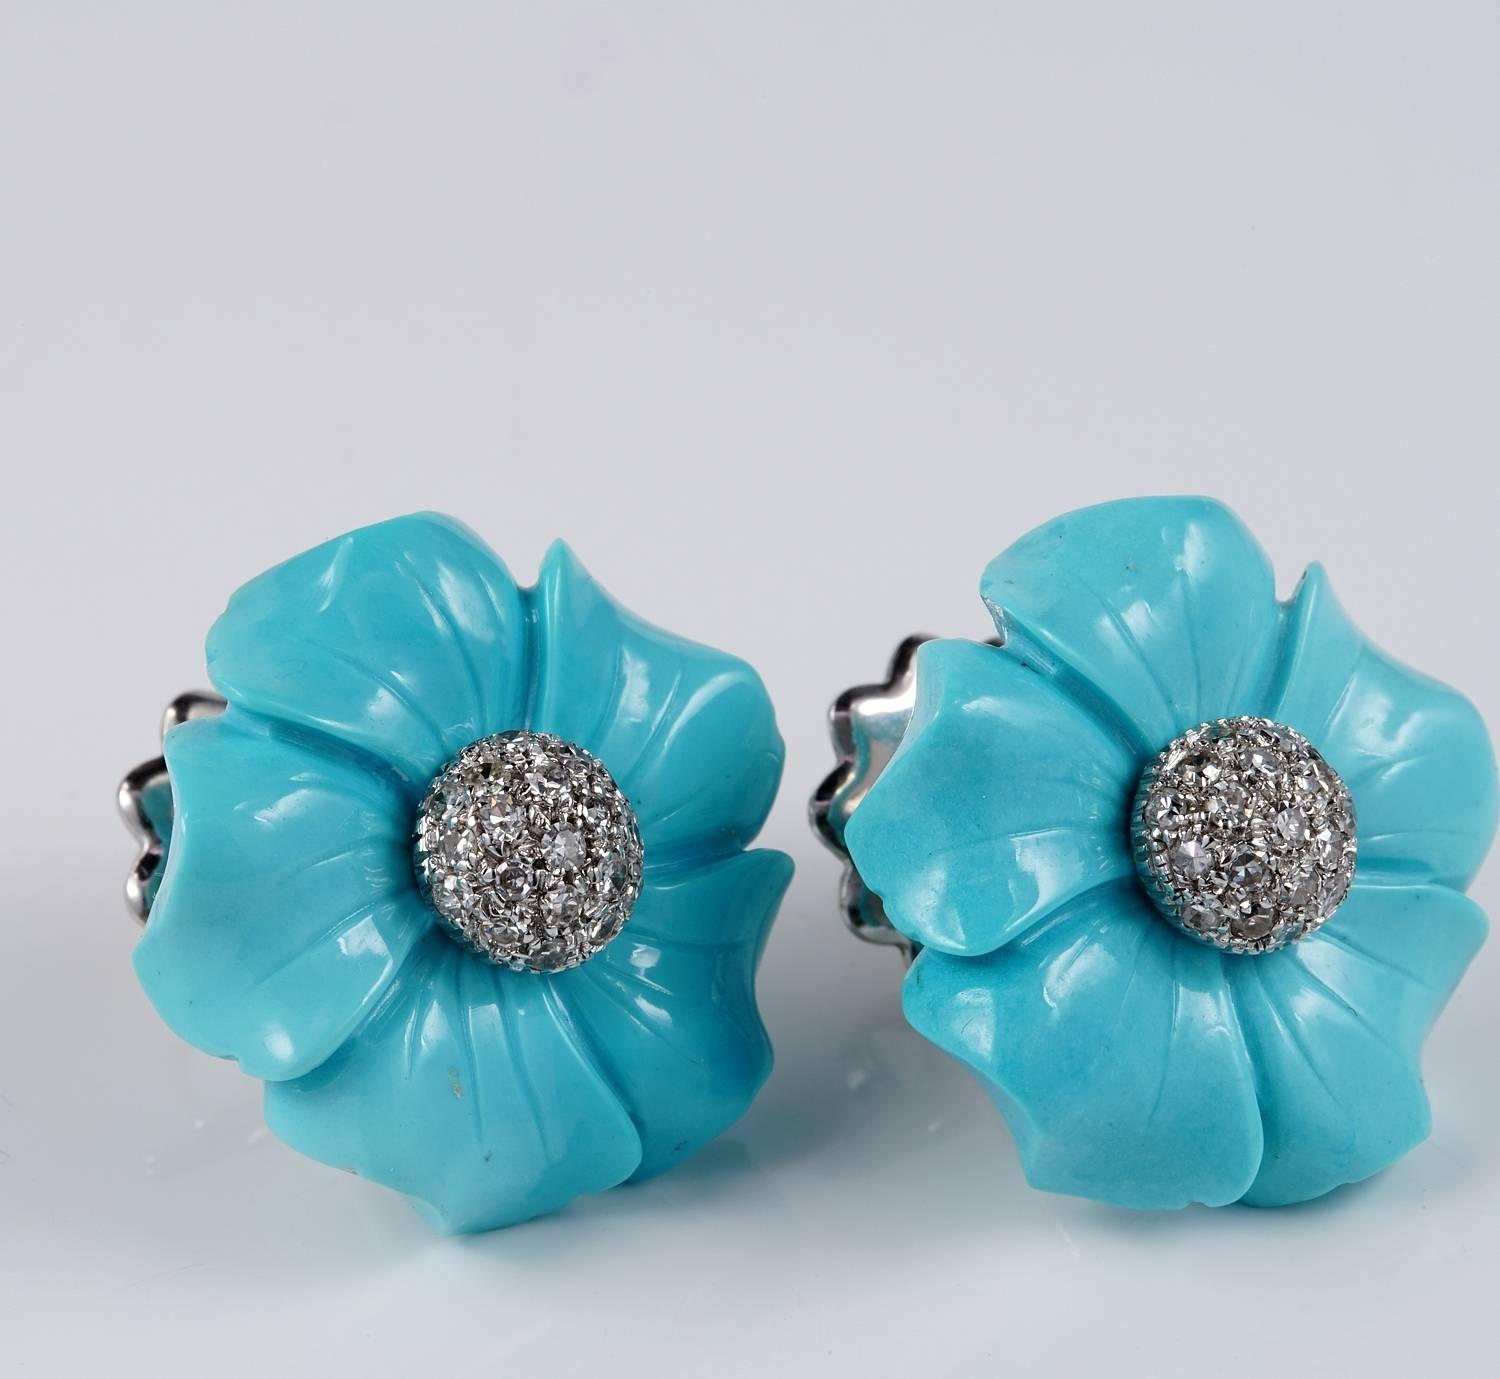 Chic and feminine vintage Natural Turquoise and Diamond earrings of Italian origin 1960 Ca
Stunning flower shape expertly hand carved and polished from Natural untreated Turquoise rough gemstone – each flower has a round heart surmounted by old cut